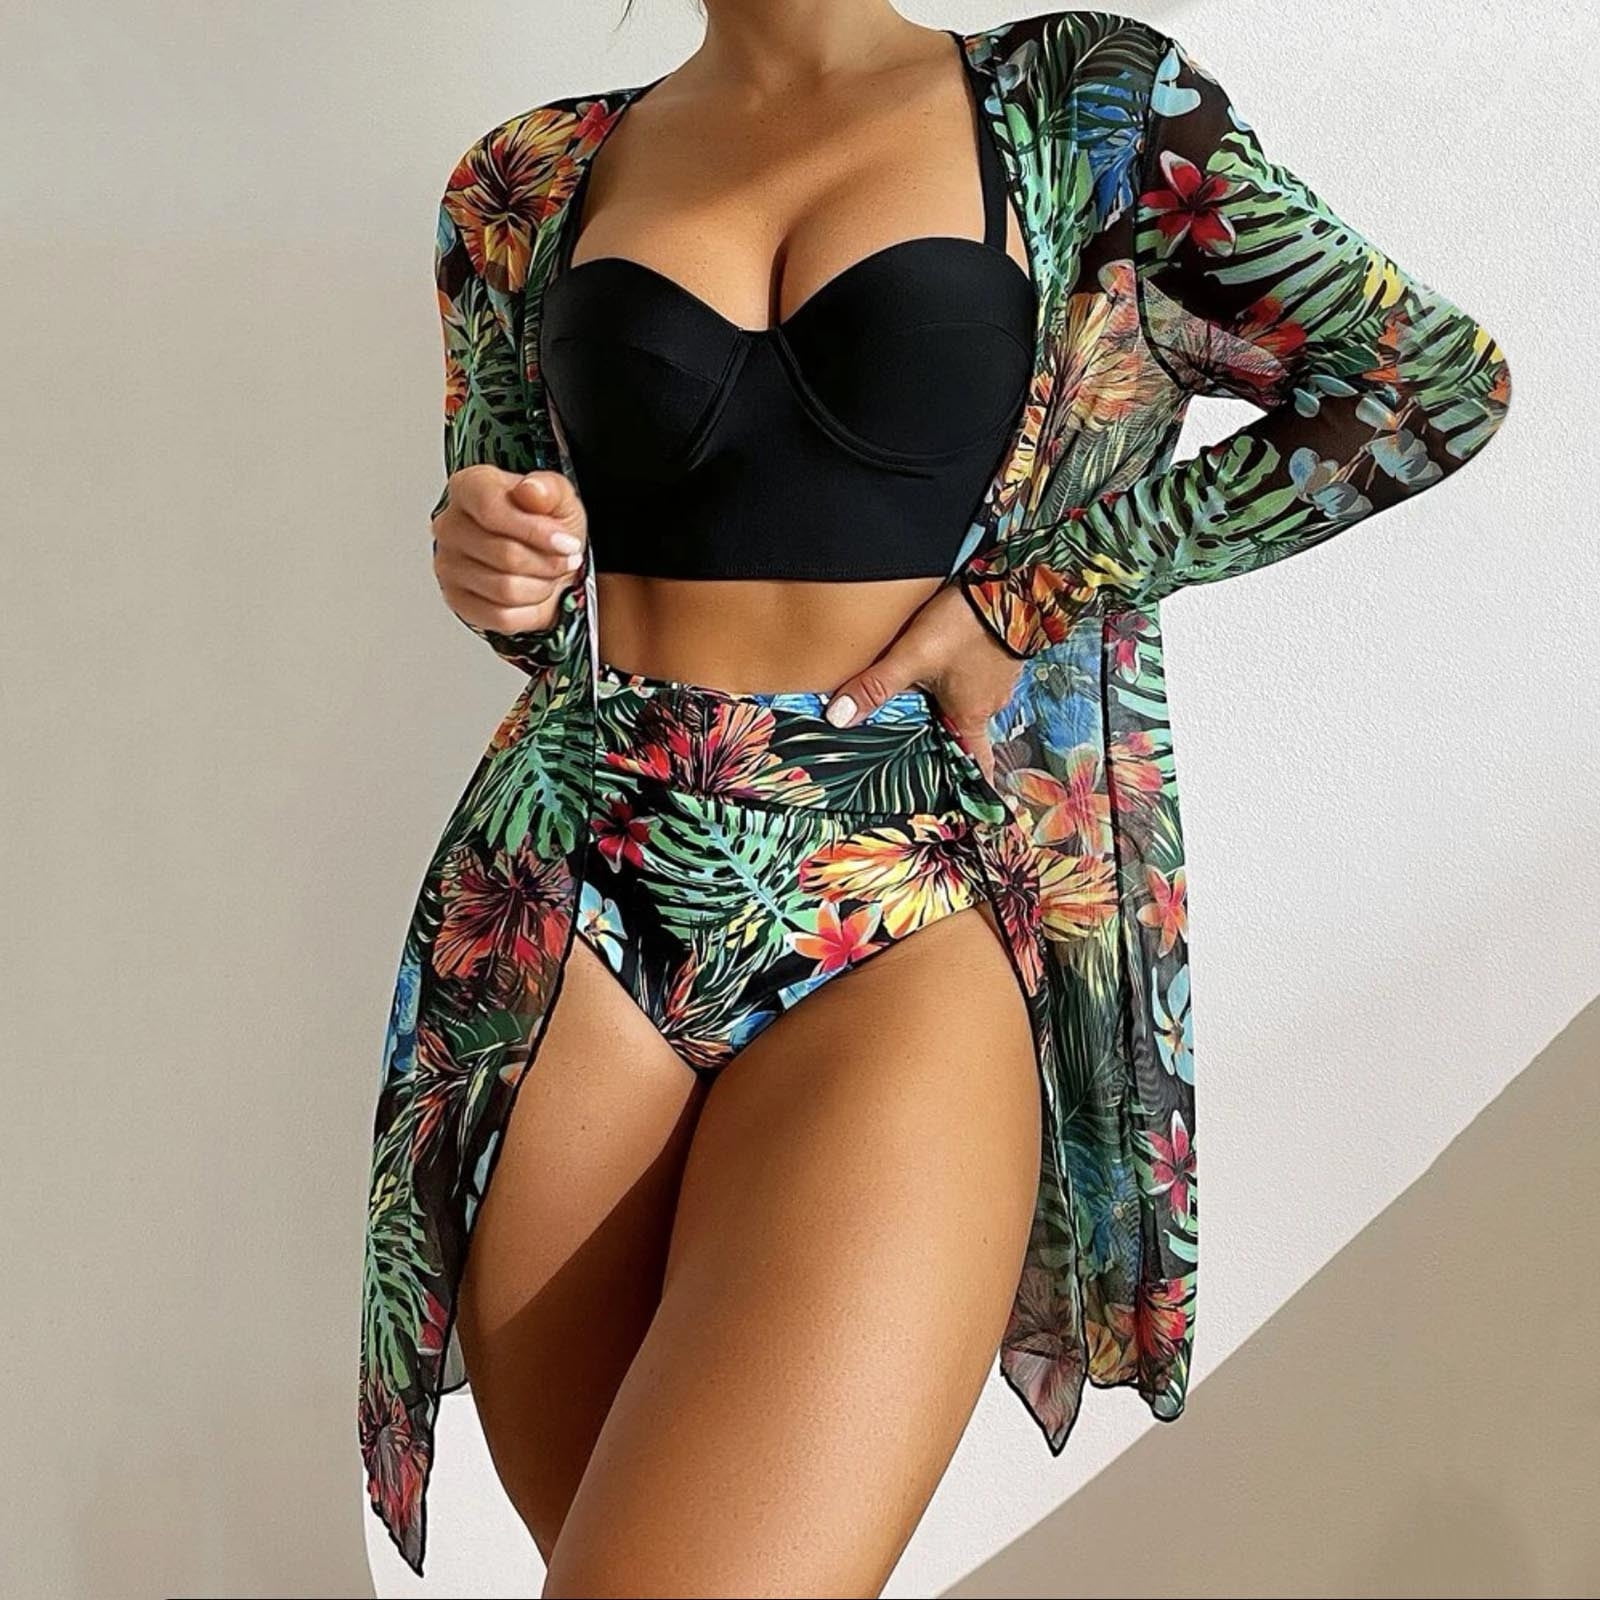 VBARHMQRT Female Swimsuit Romper with Built in Bra and Shorts Women's  Printed Lace up 1 Piece Swimsuit Bathing Suit Swimmwear Swim Cover up for  Women Plus Boho Women's 1 Piece Swimsuits Long